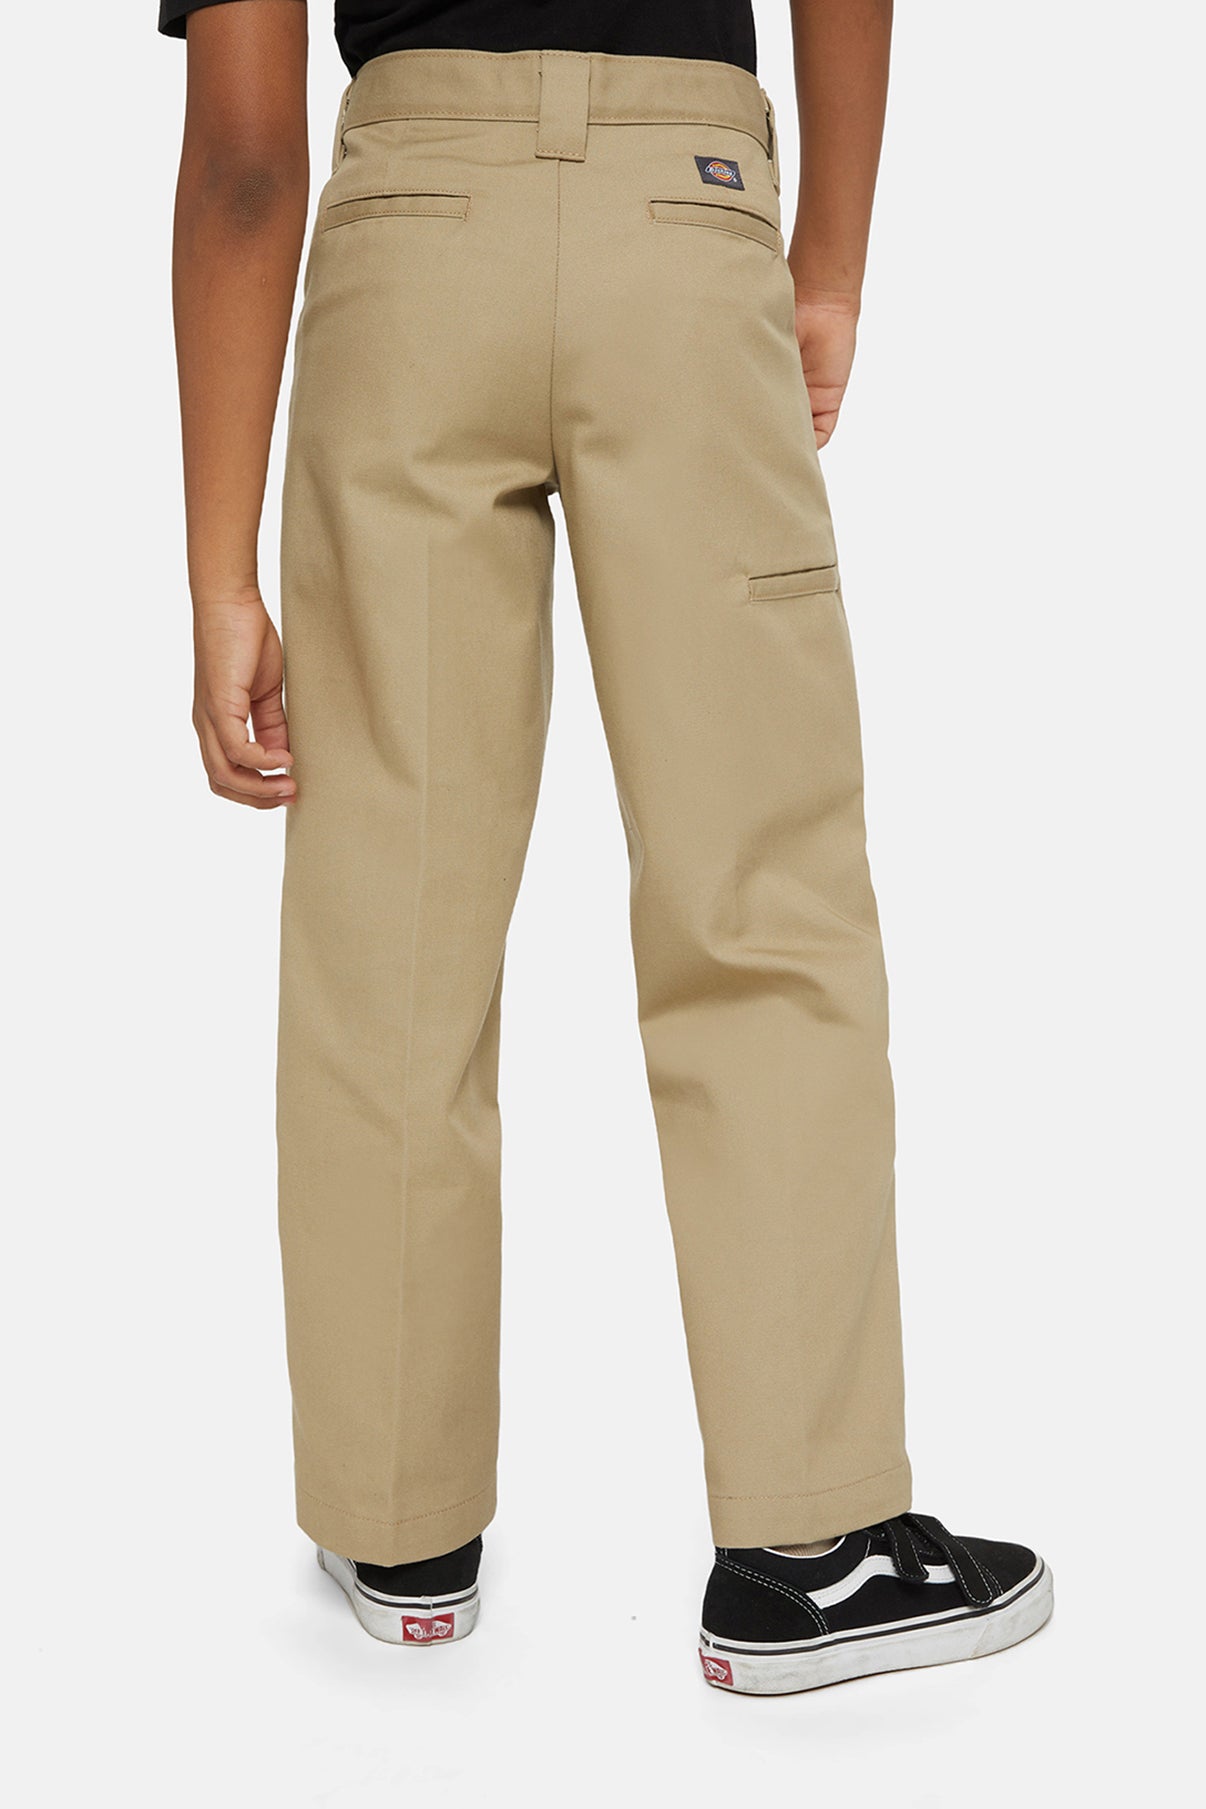 Dickies TROUSSERS DOUBLE KNEE WORK PANT